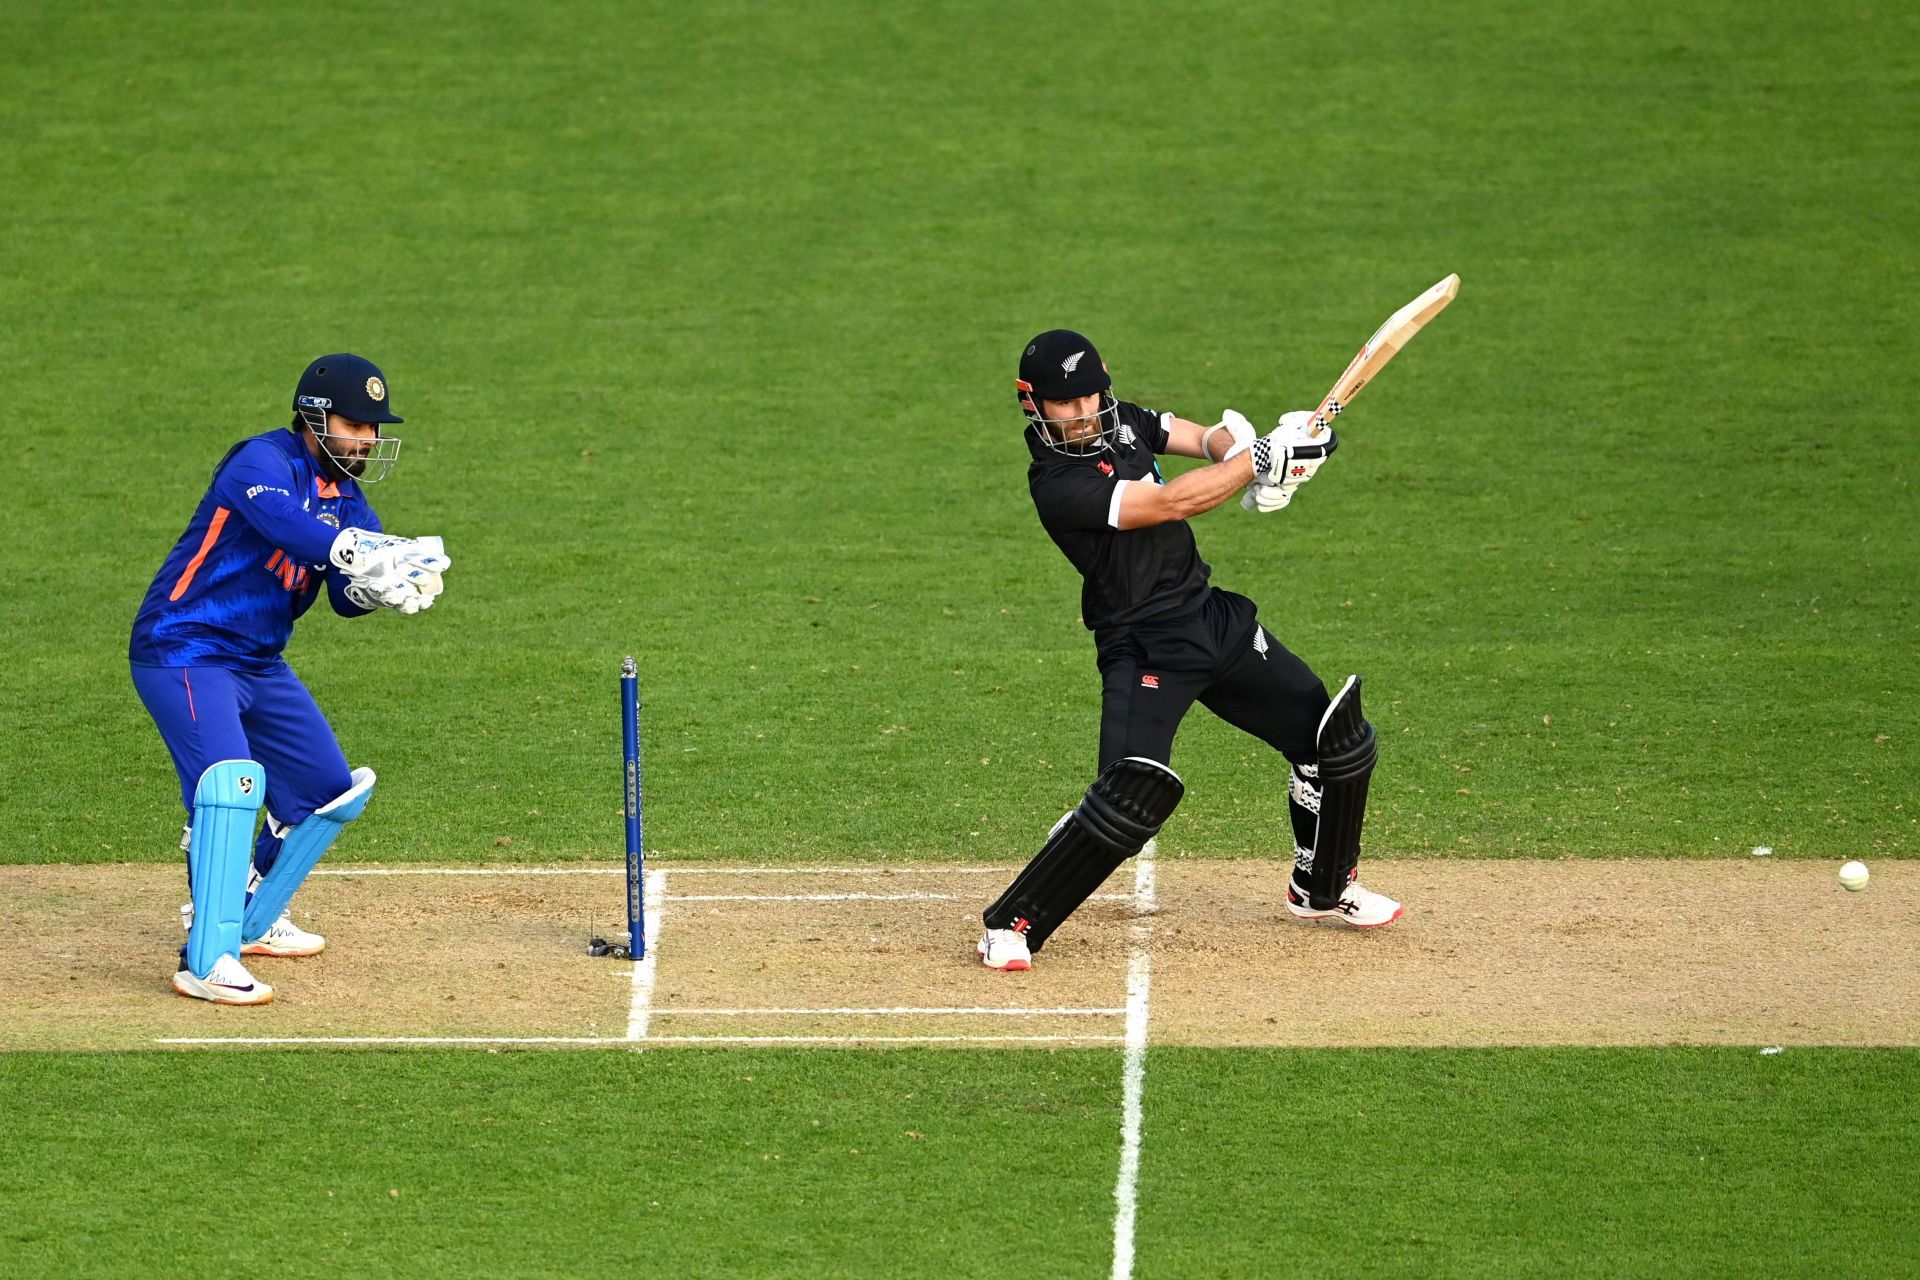 Can the Kiwis ascend to the top spot in the ICC Cricket World Cup Super League points table? (Image: Getty)